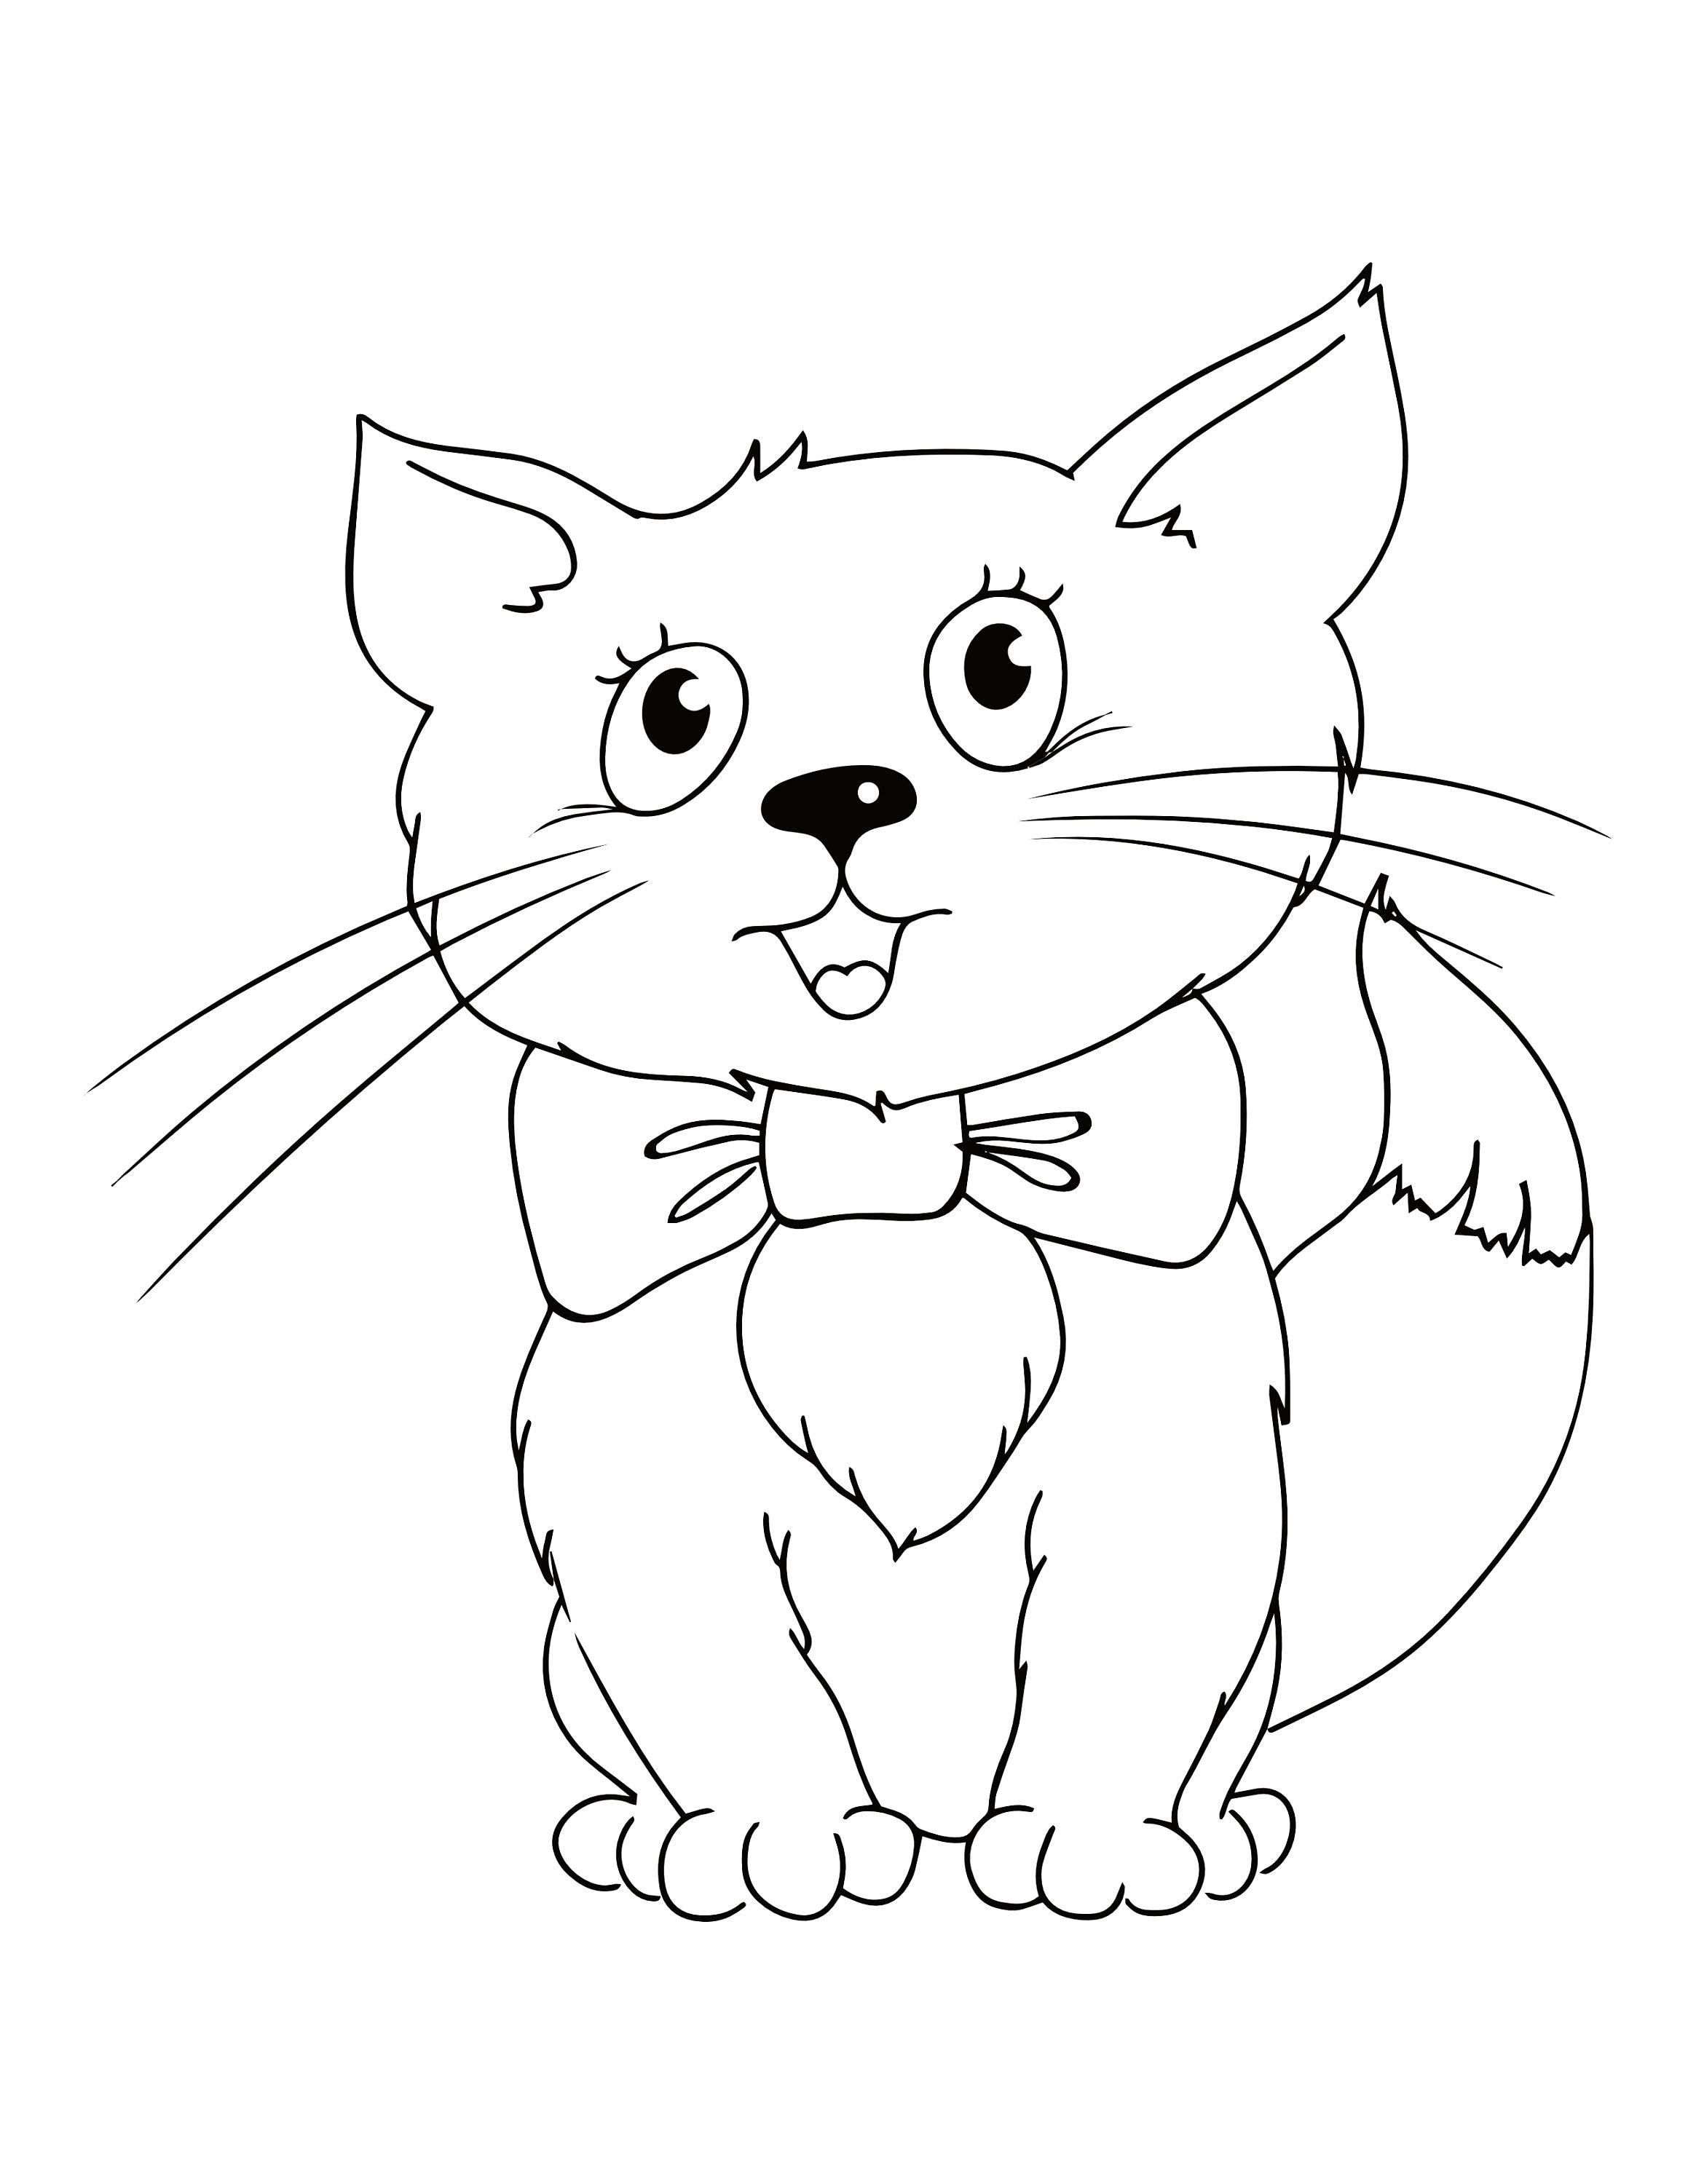 Kitten coloring pages printable kitten coloring pages for etsy